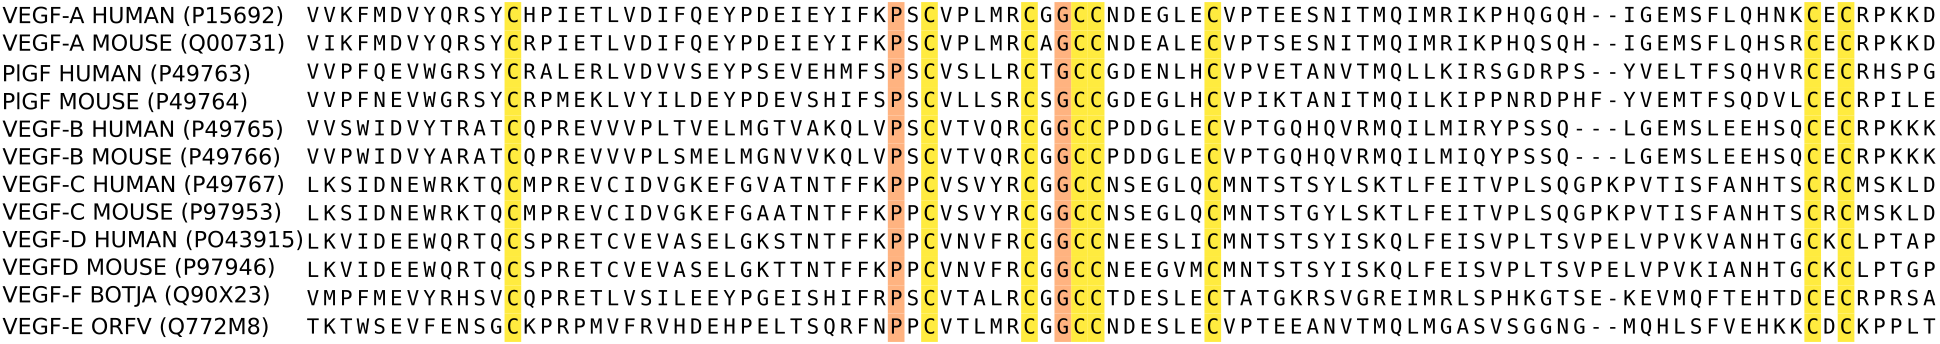 An alignment of amino acids in a protein for mice and humans. Each line represents the sequence of a different individual. Each letter represents an amino acid. 